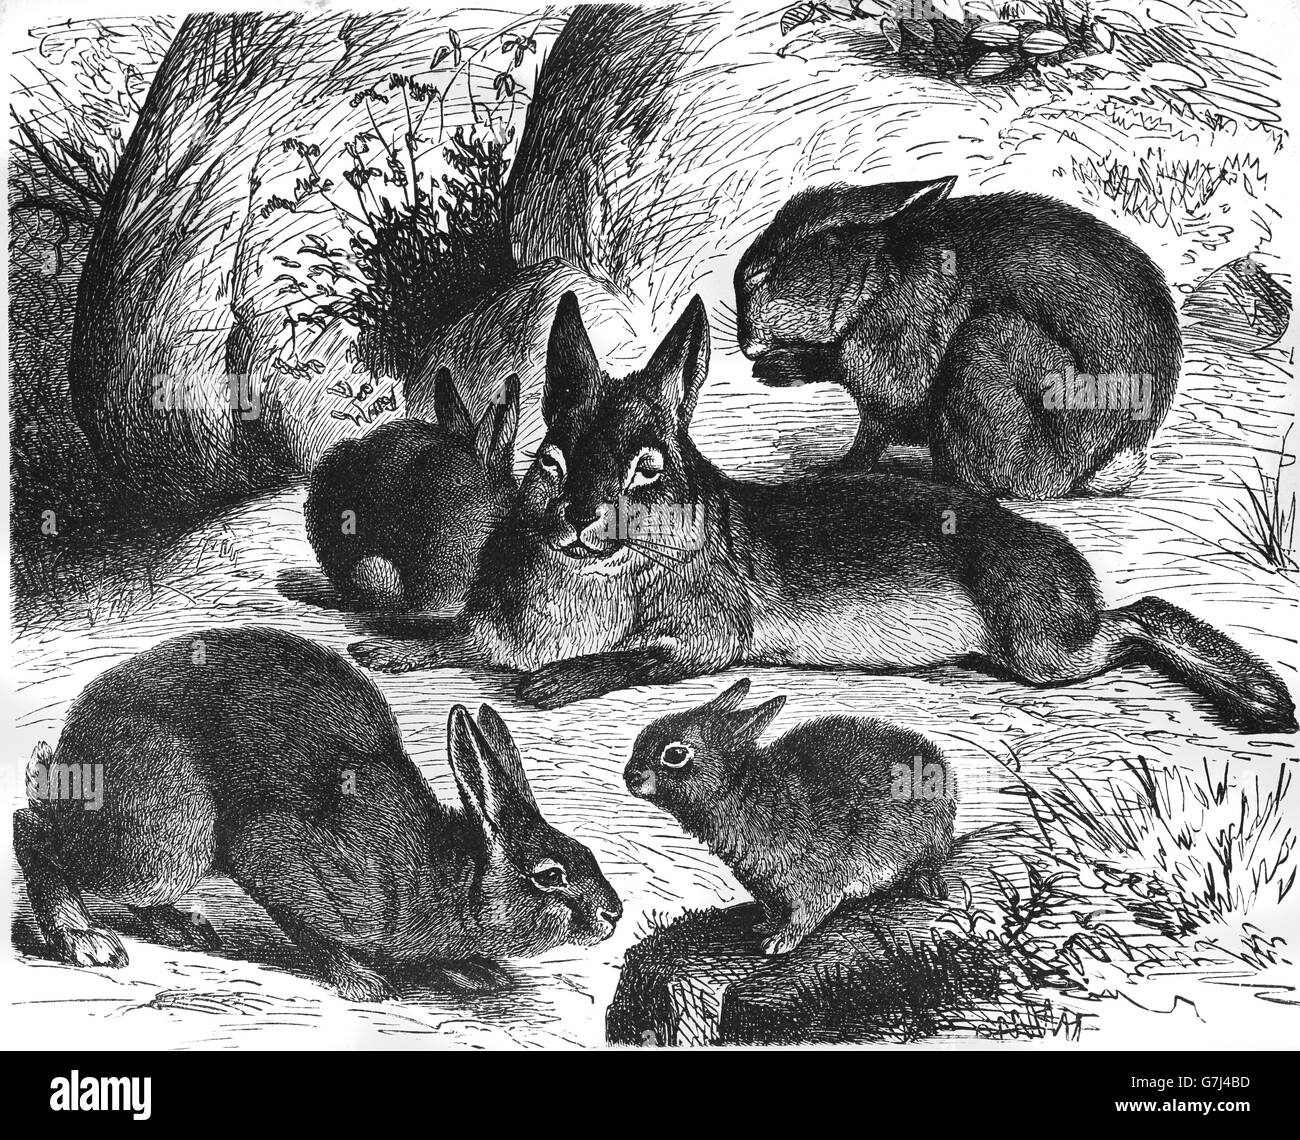 European rabbit, Oryctolagus cuniculus, illustration from book dated 1904 Stock Photo